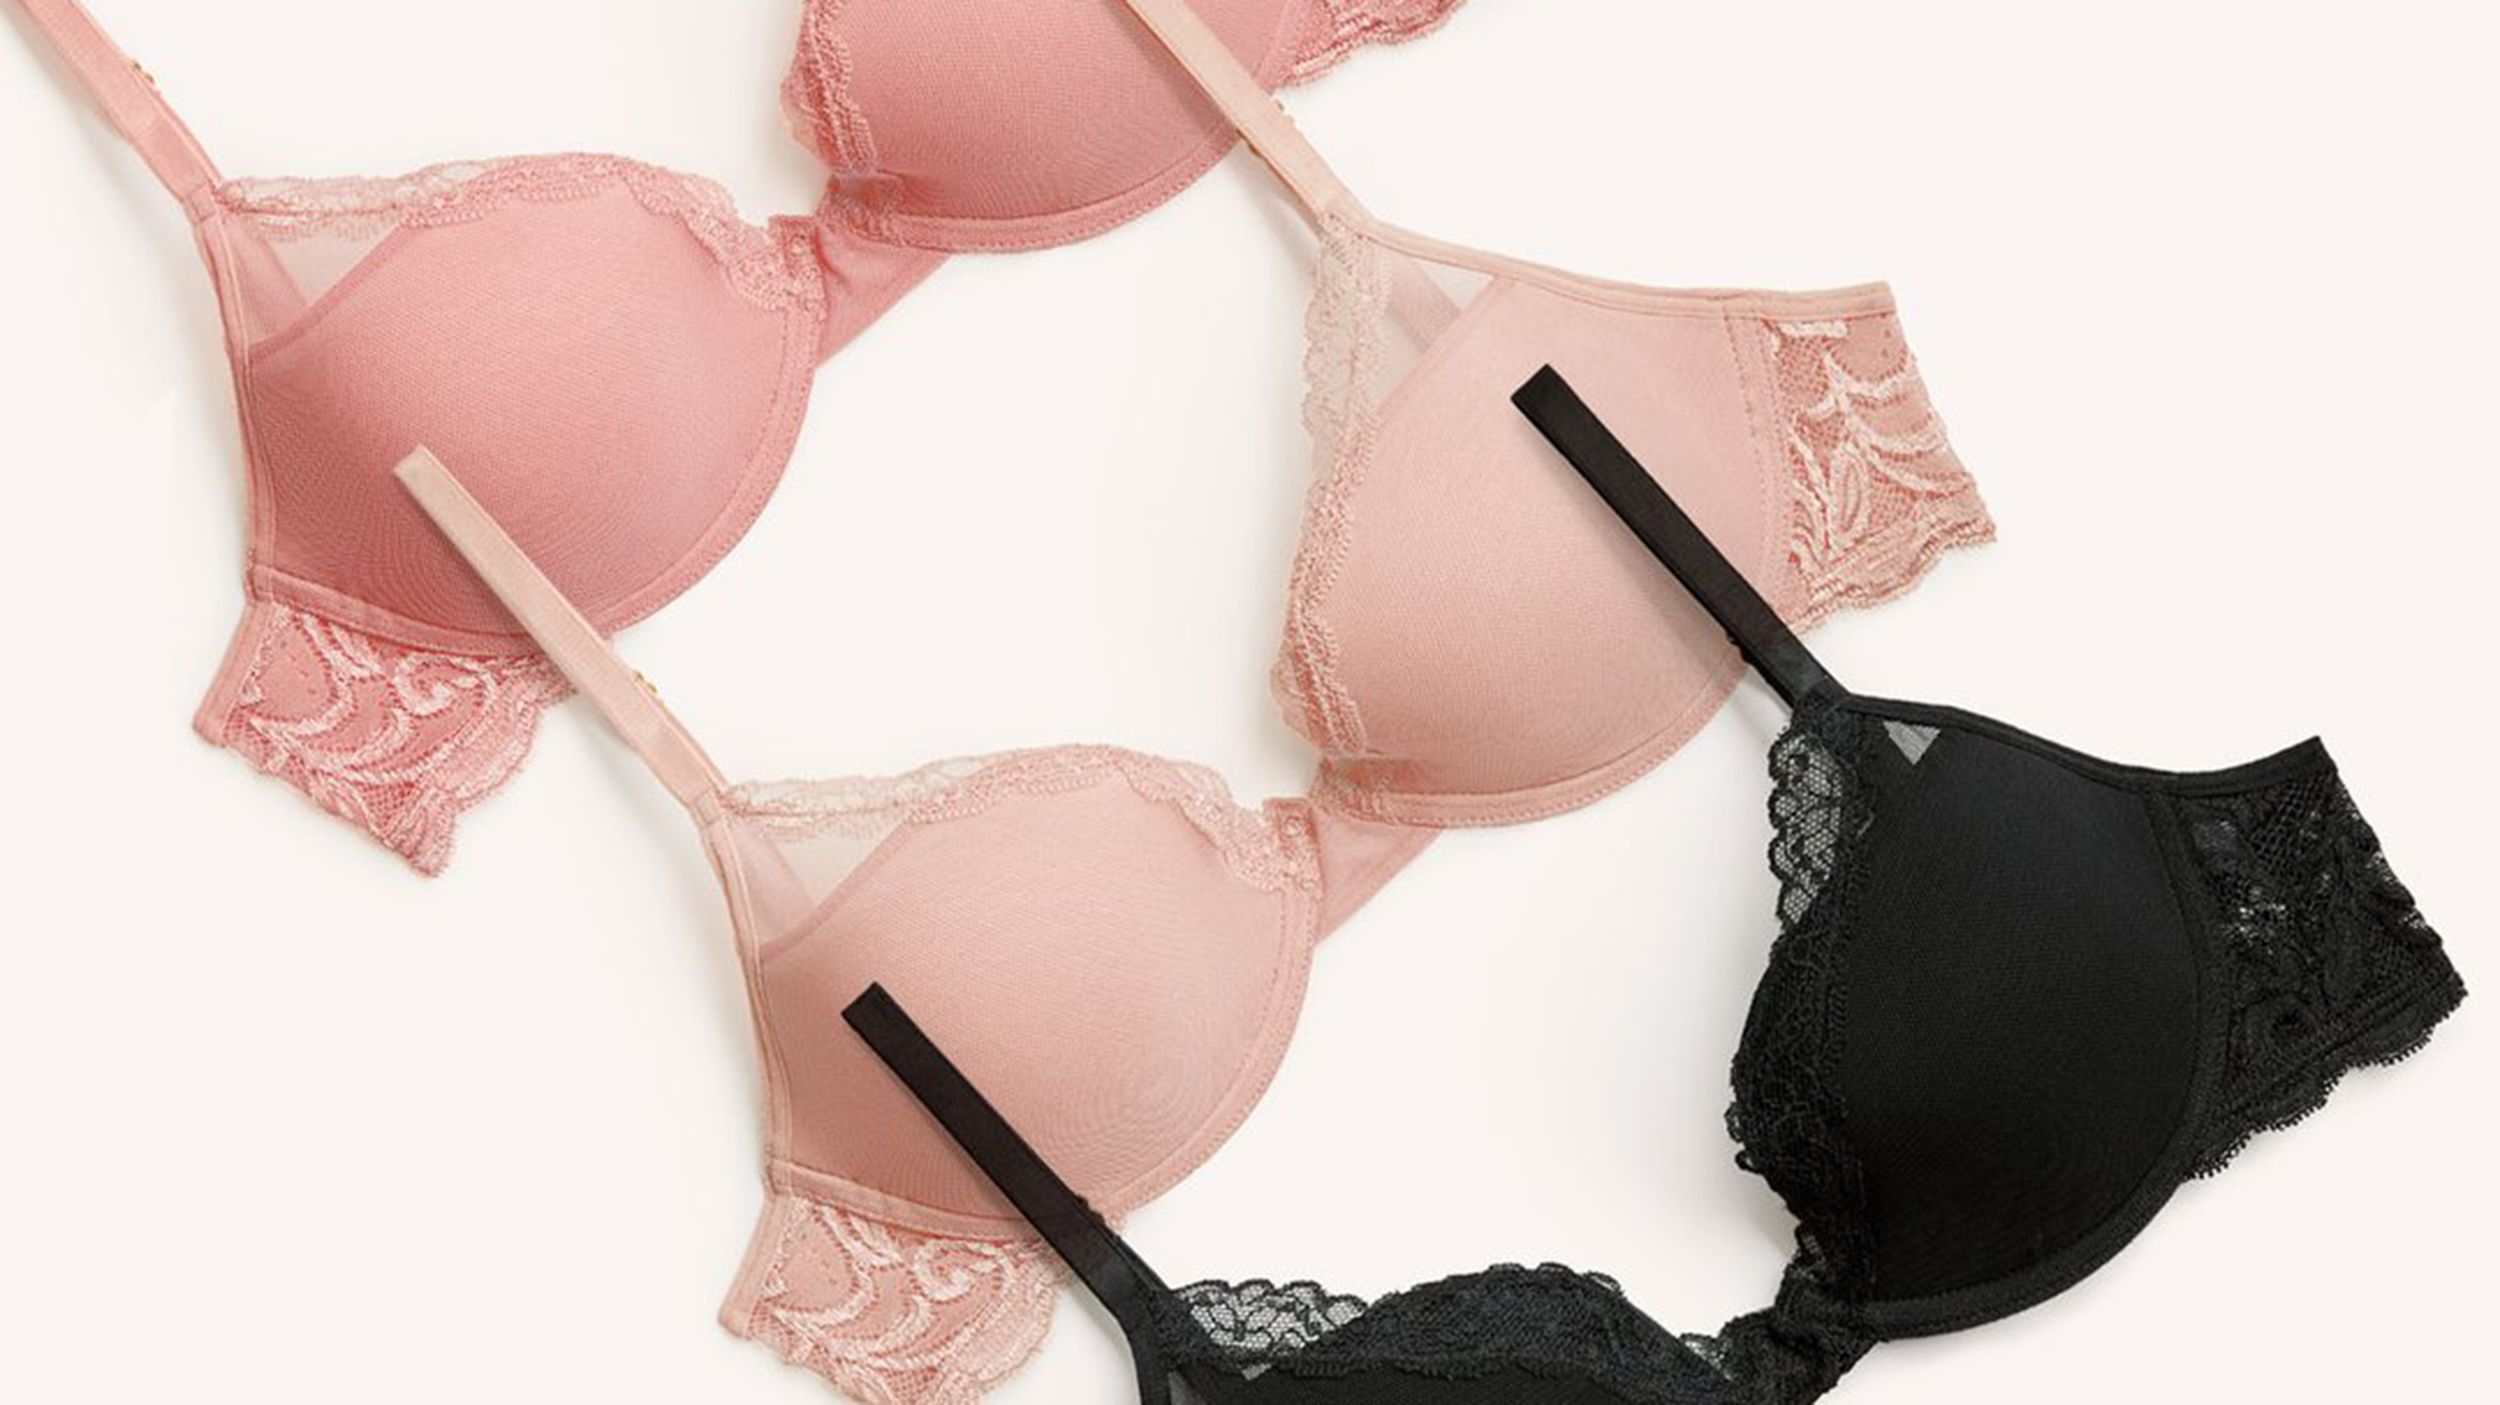 The Impossibly Lightweight Bra Alyssa Is Stocking Up on for Summer